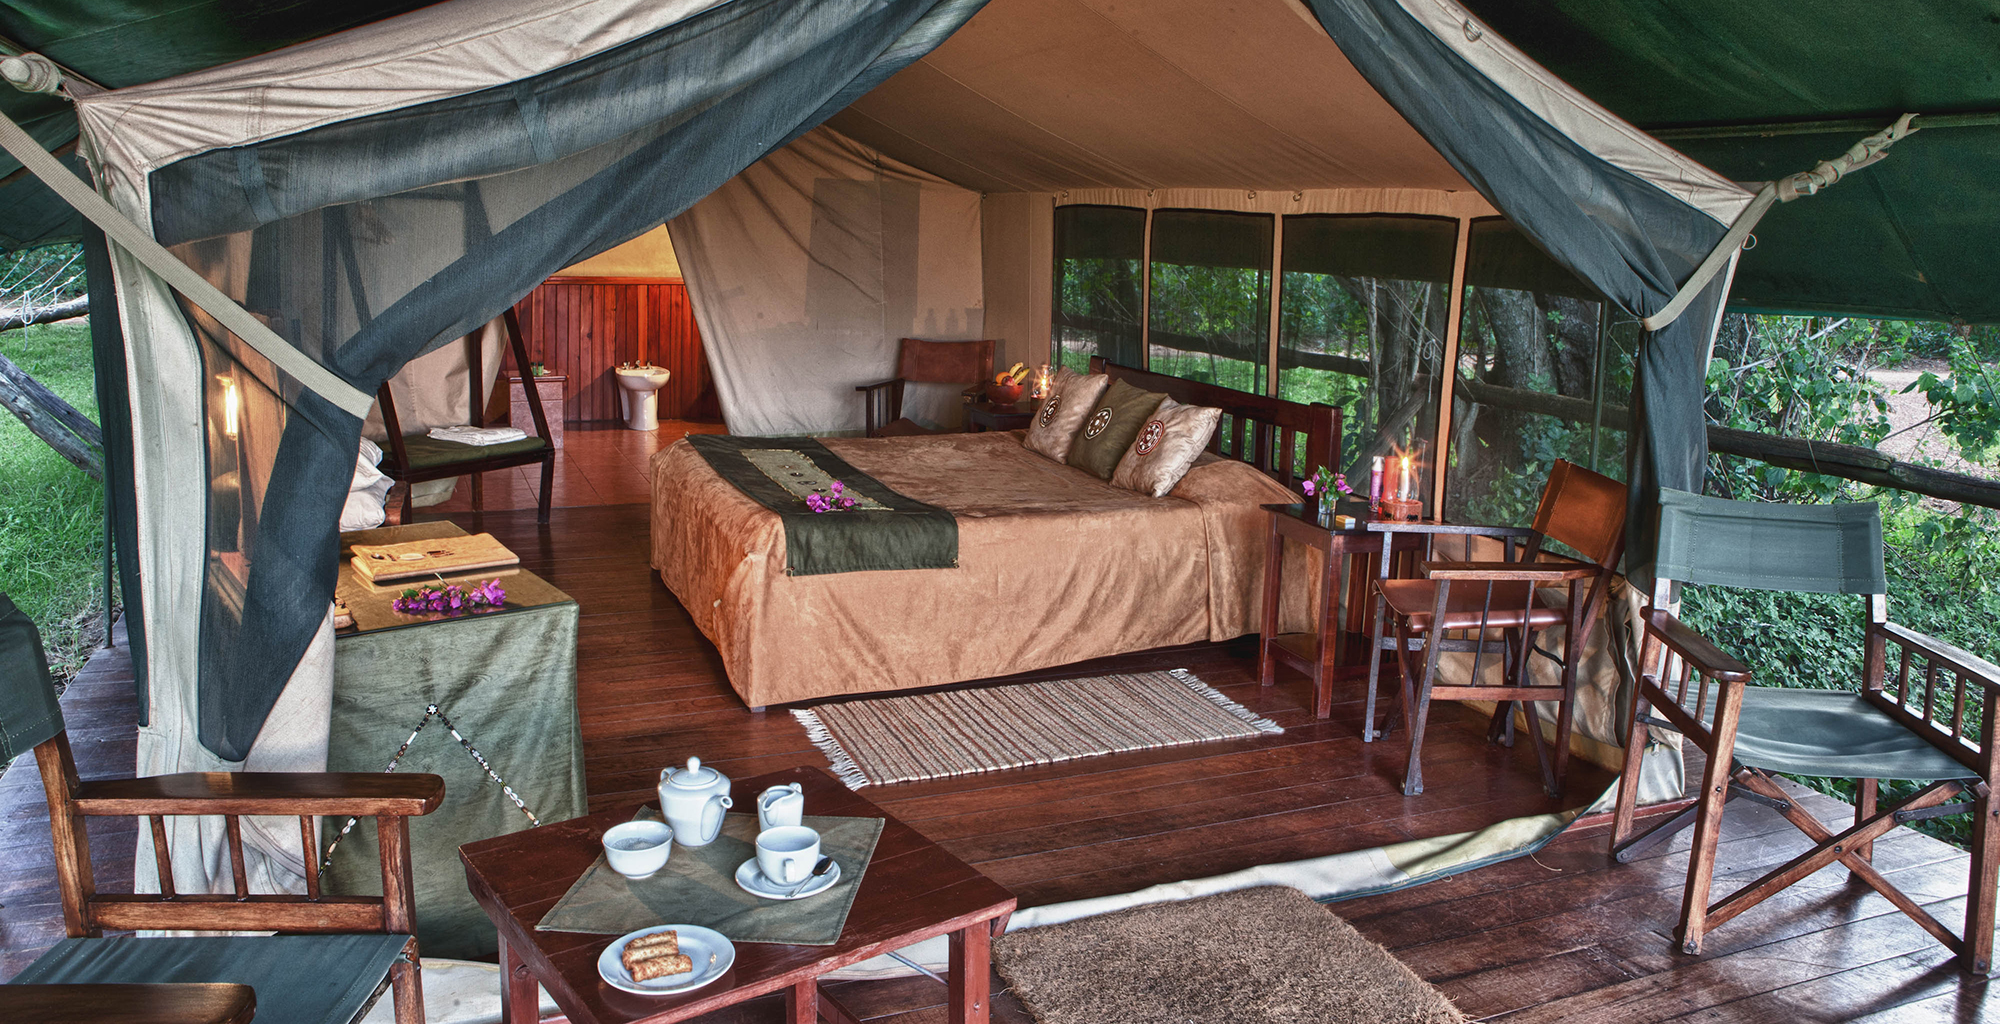 You are currently viewing Details of the Maasai Mara’s Little Governors Camp